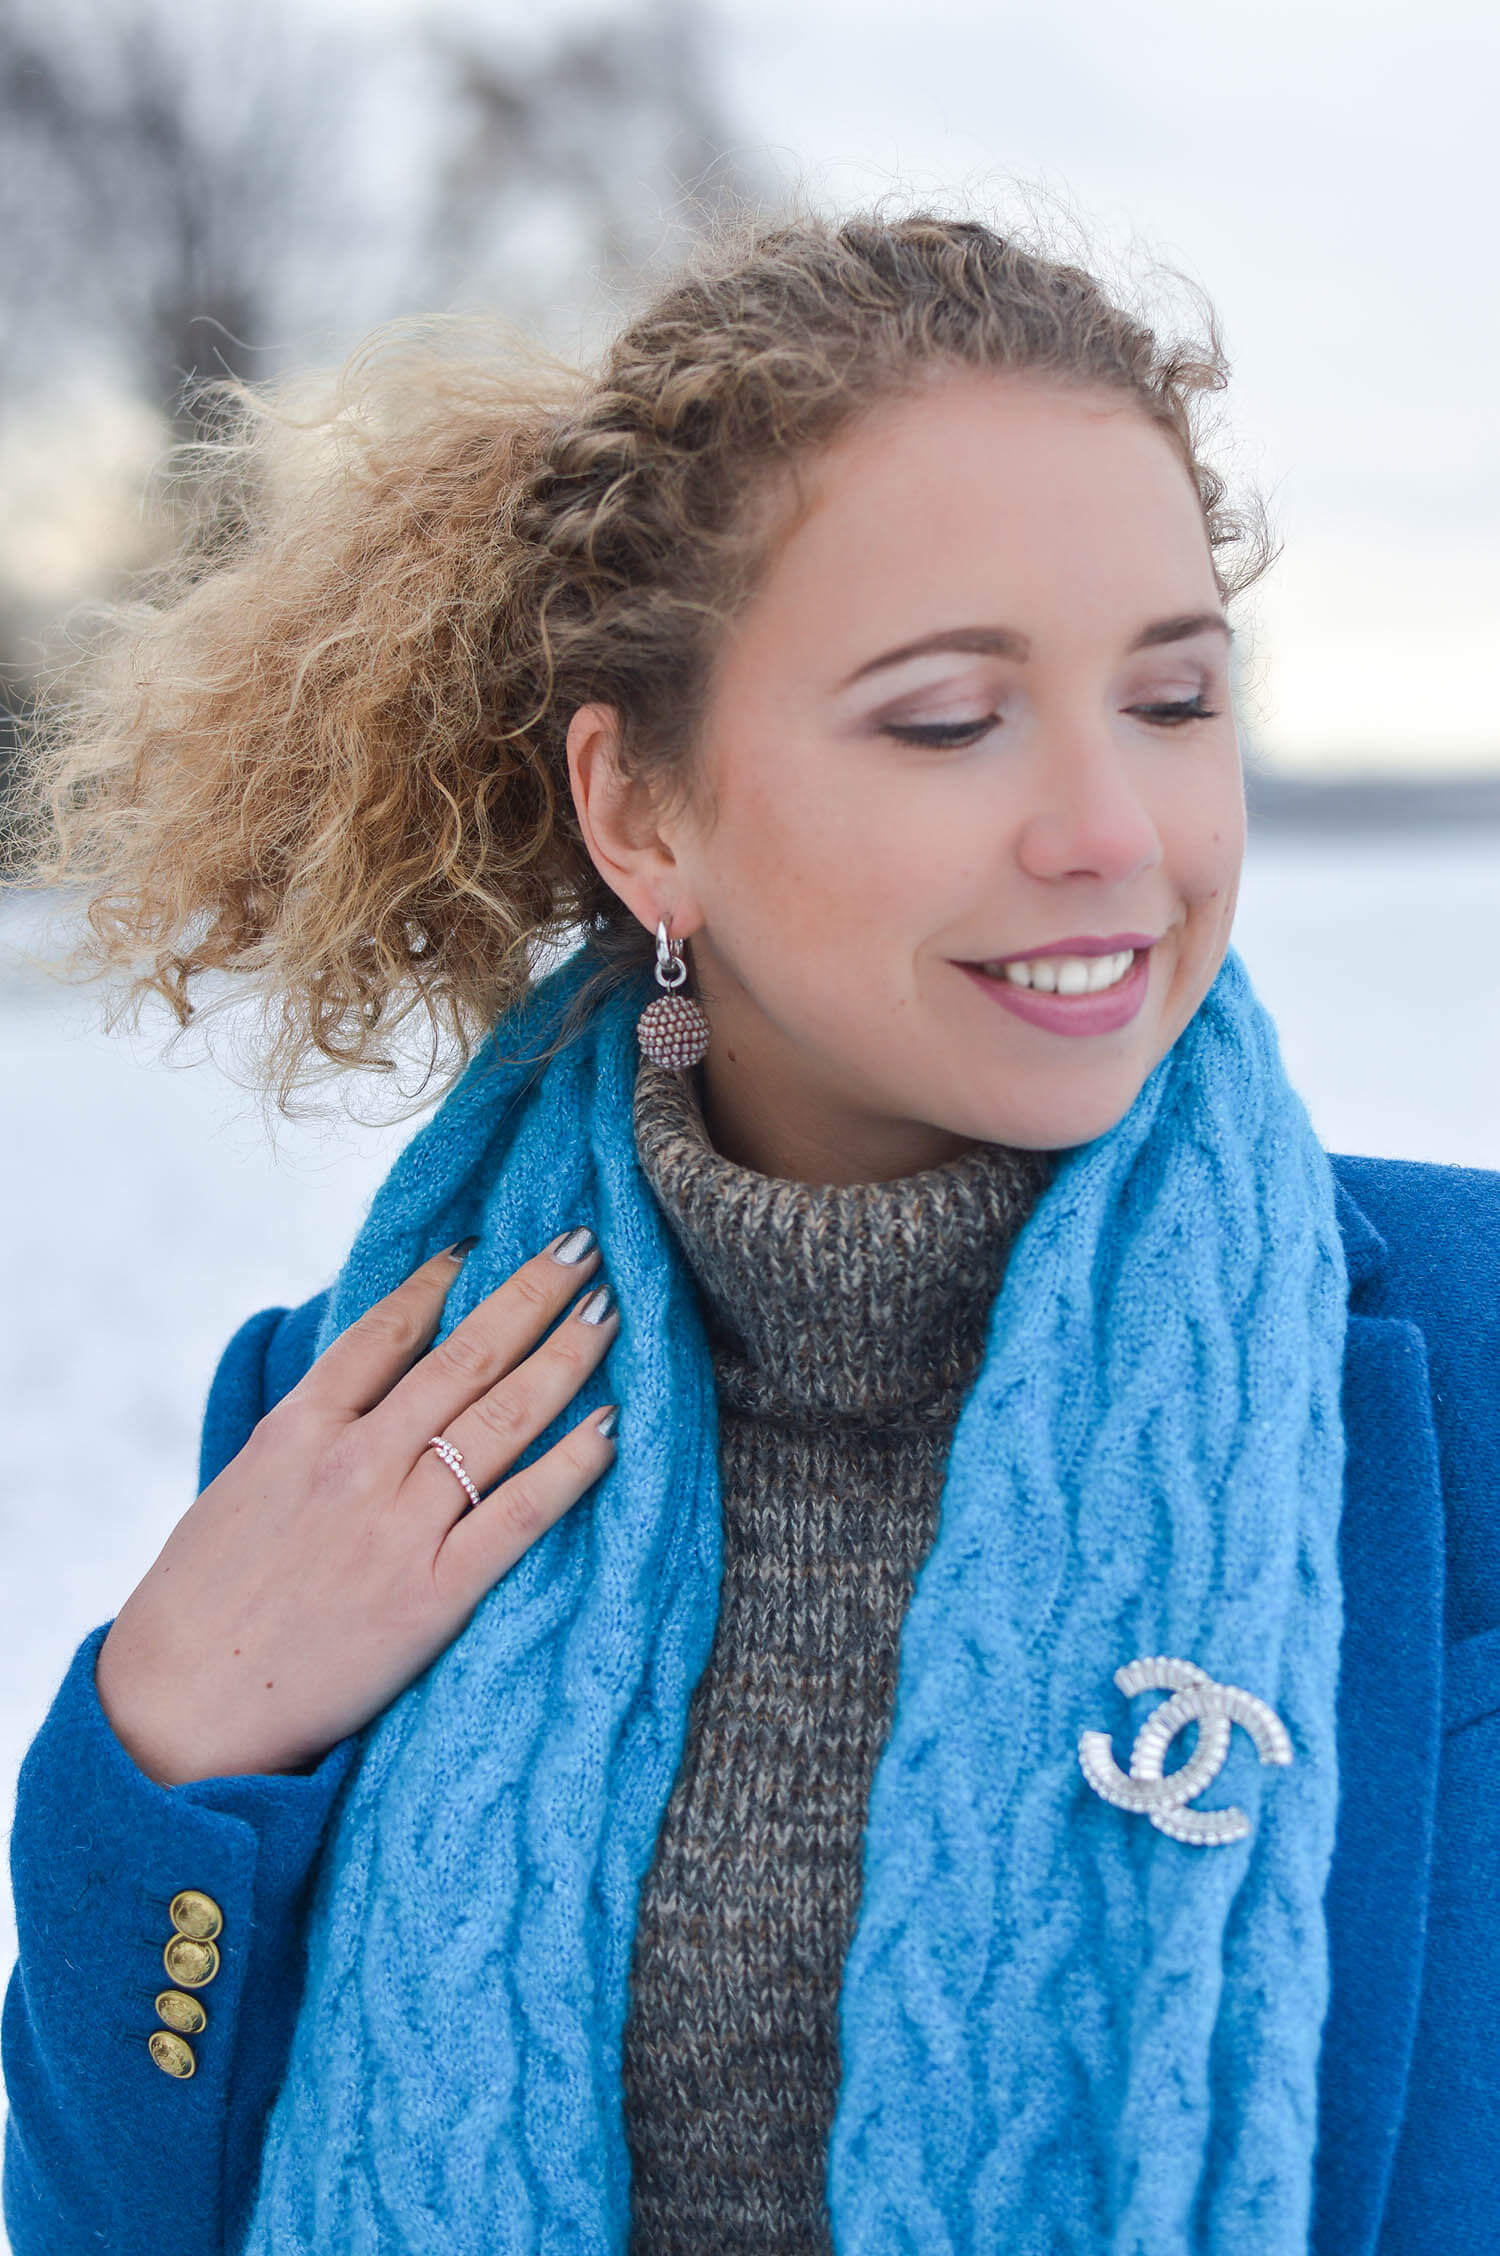 Kationette-fashionblogger-nrw-Happy-New-Year-Outfit-Azure-Blue-Coat-and-Scarf-for-a-snowy-day-in-Dusseldorf